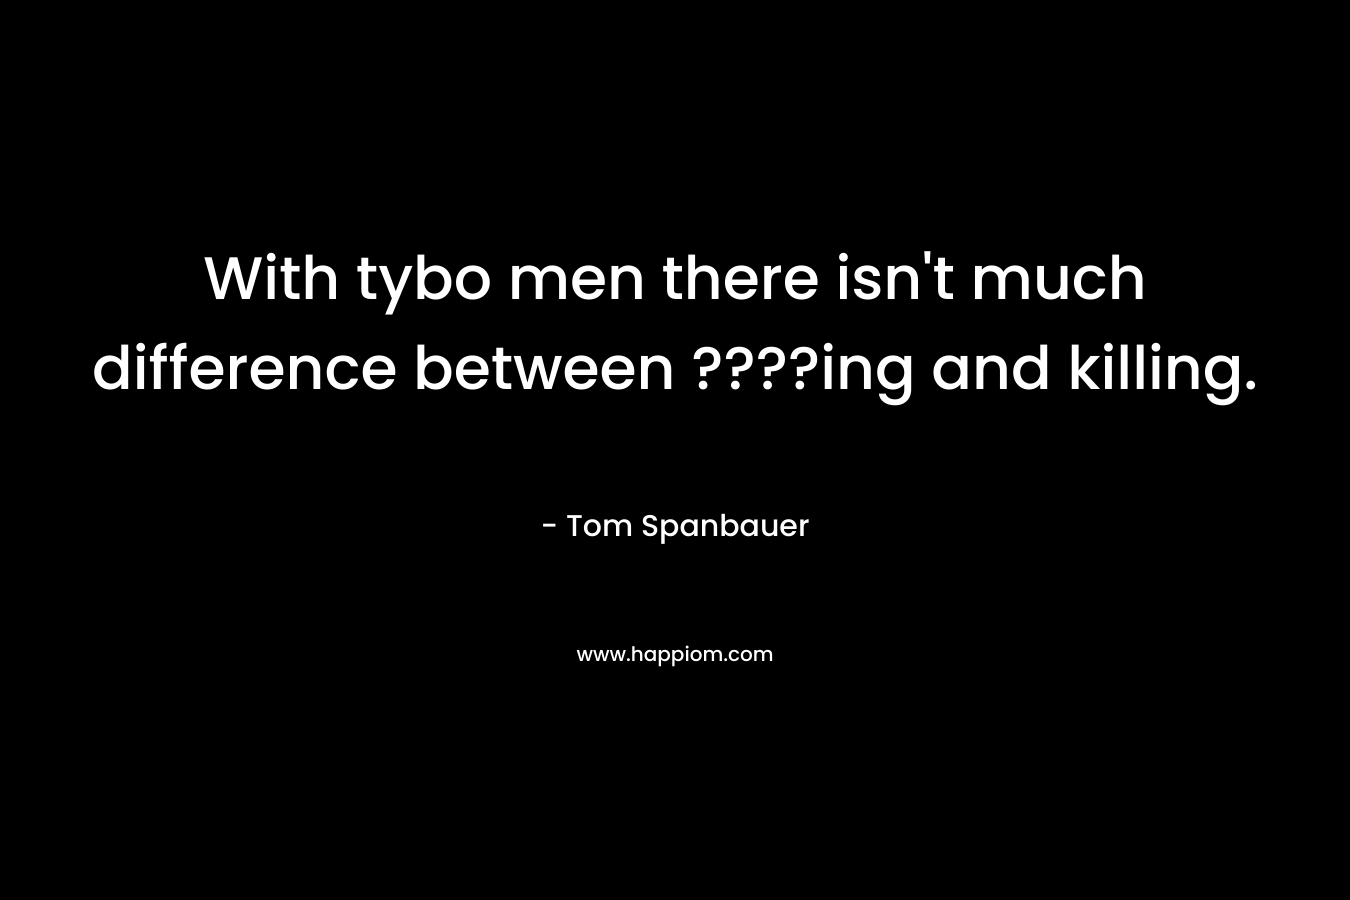 With tybo men there isn’t much difference between ????ing and killing. – Tom Spanbauer